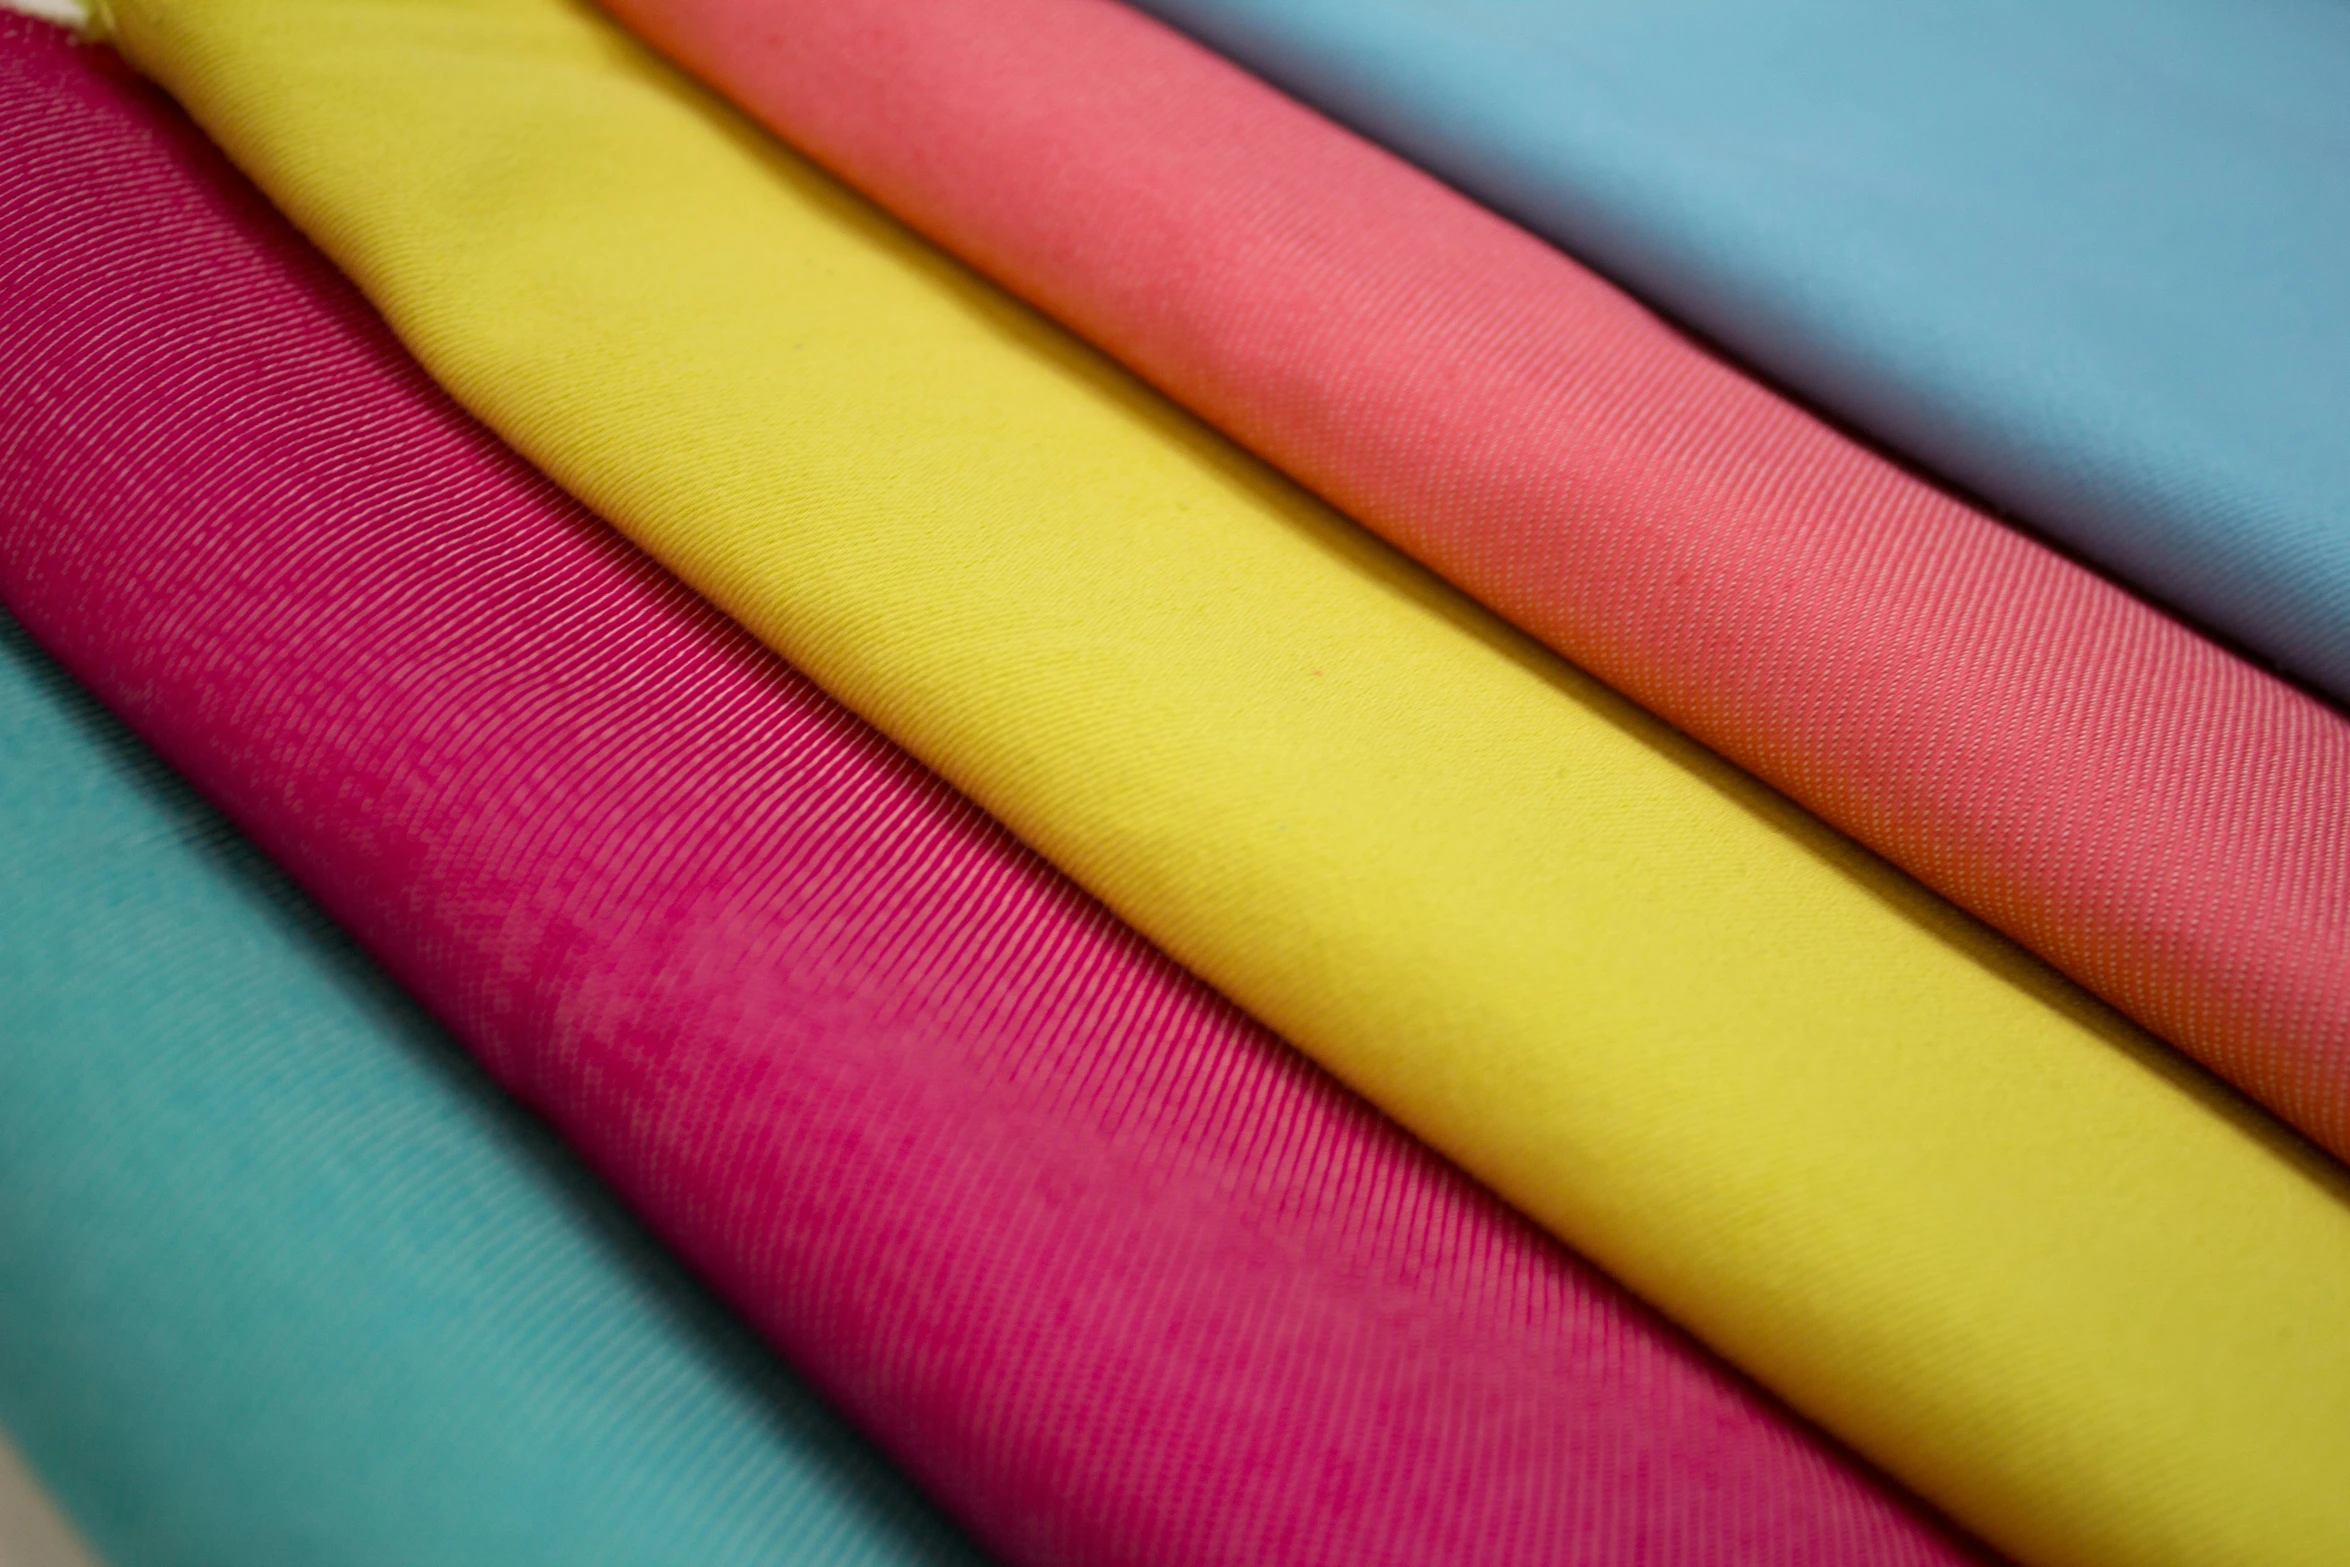 many different colored fabrics are stacked next to each other